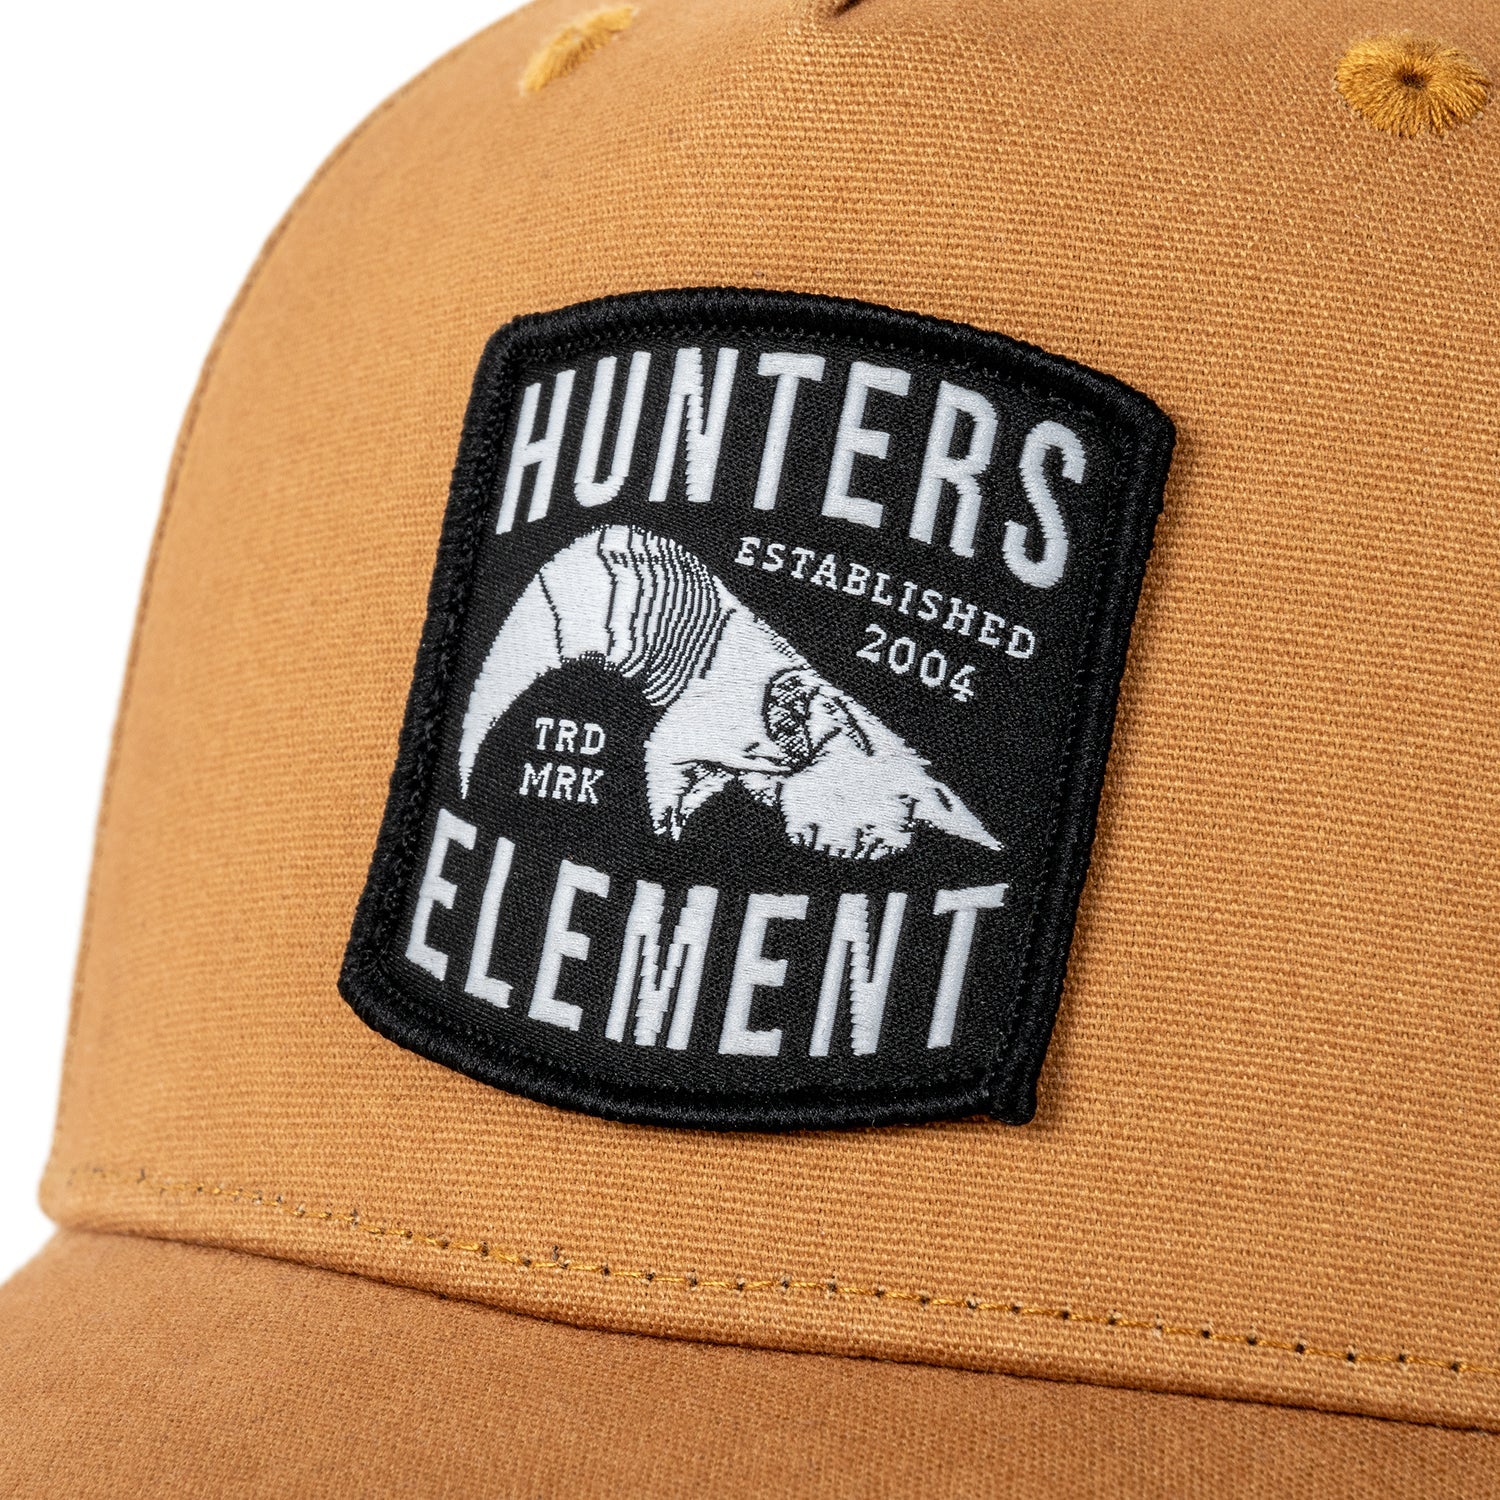 Hunters Element Bull Tahr Cap -  - Mansfield Hunting & Fishing - Products to prepare for Corona Virus